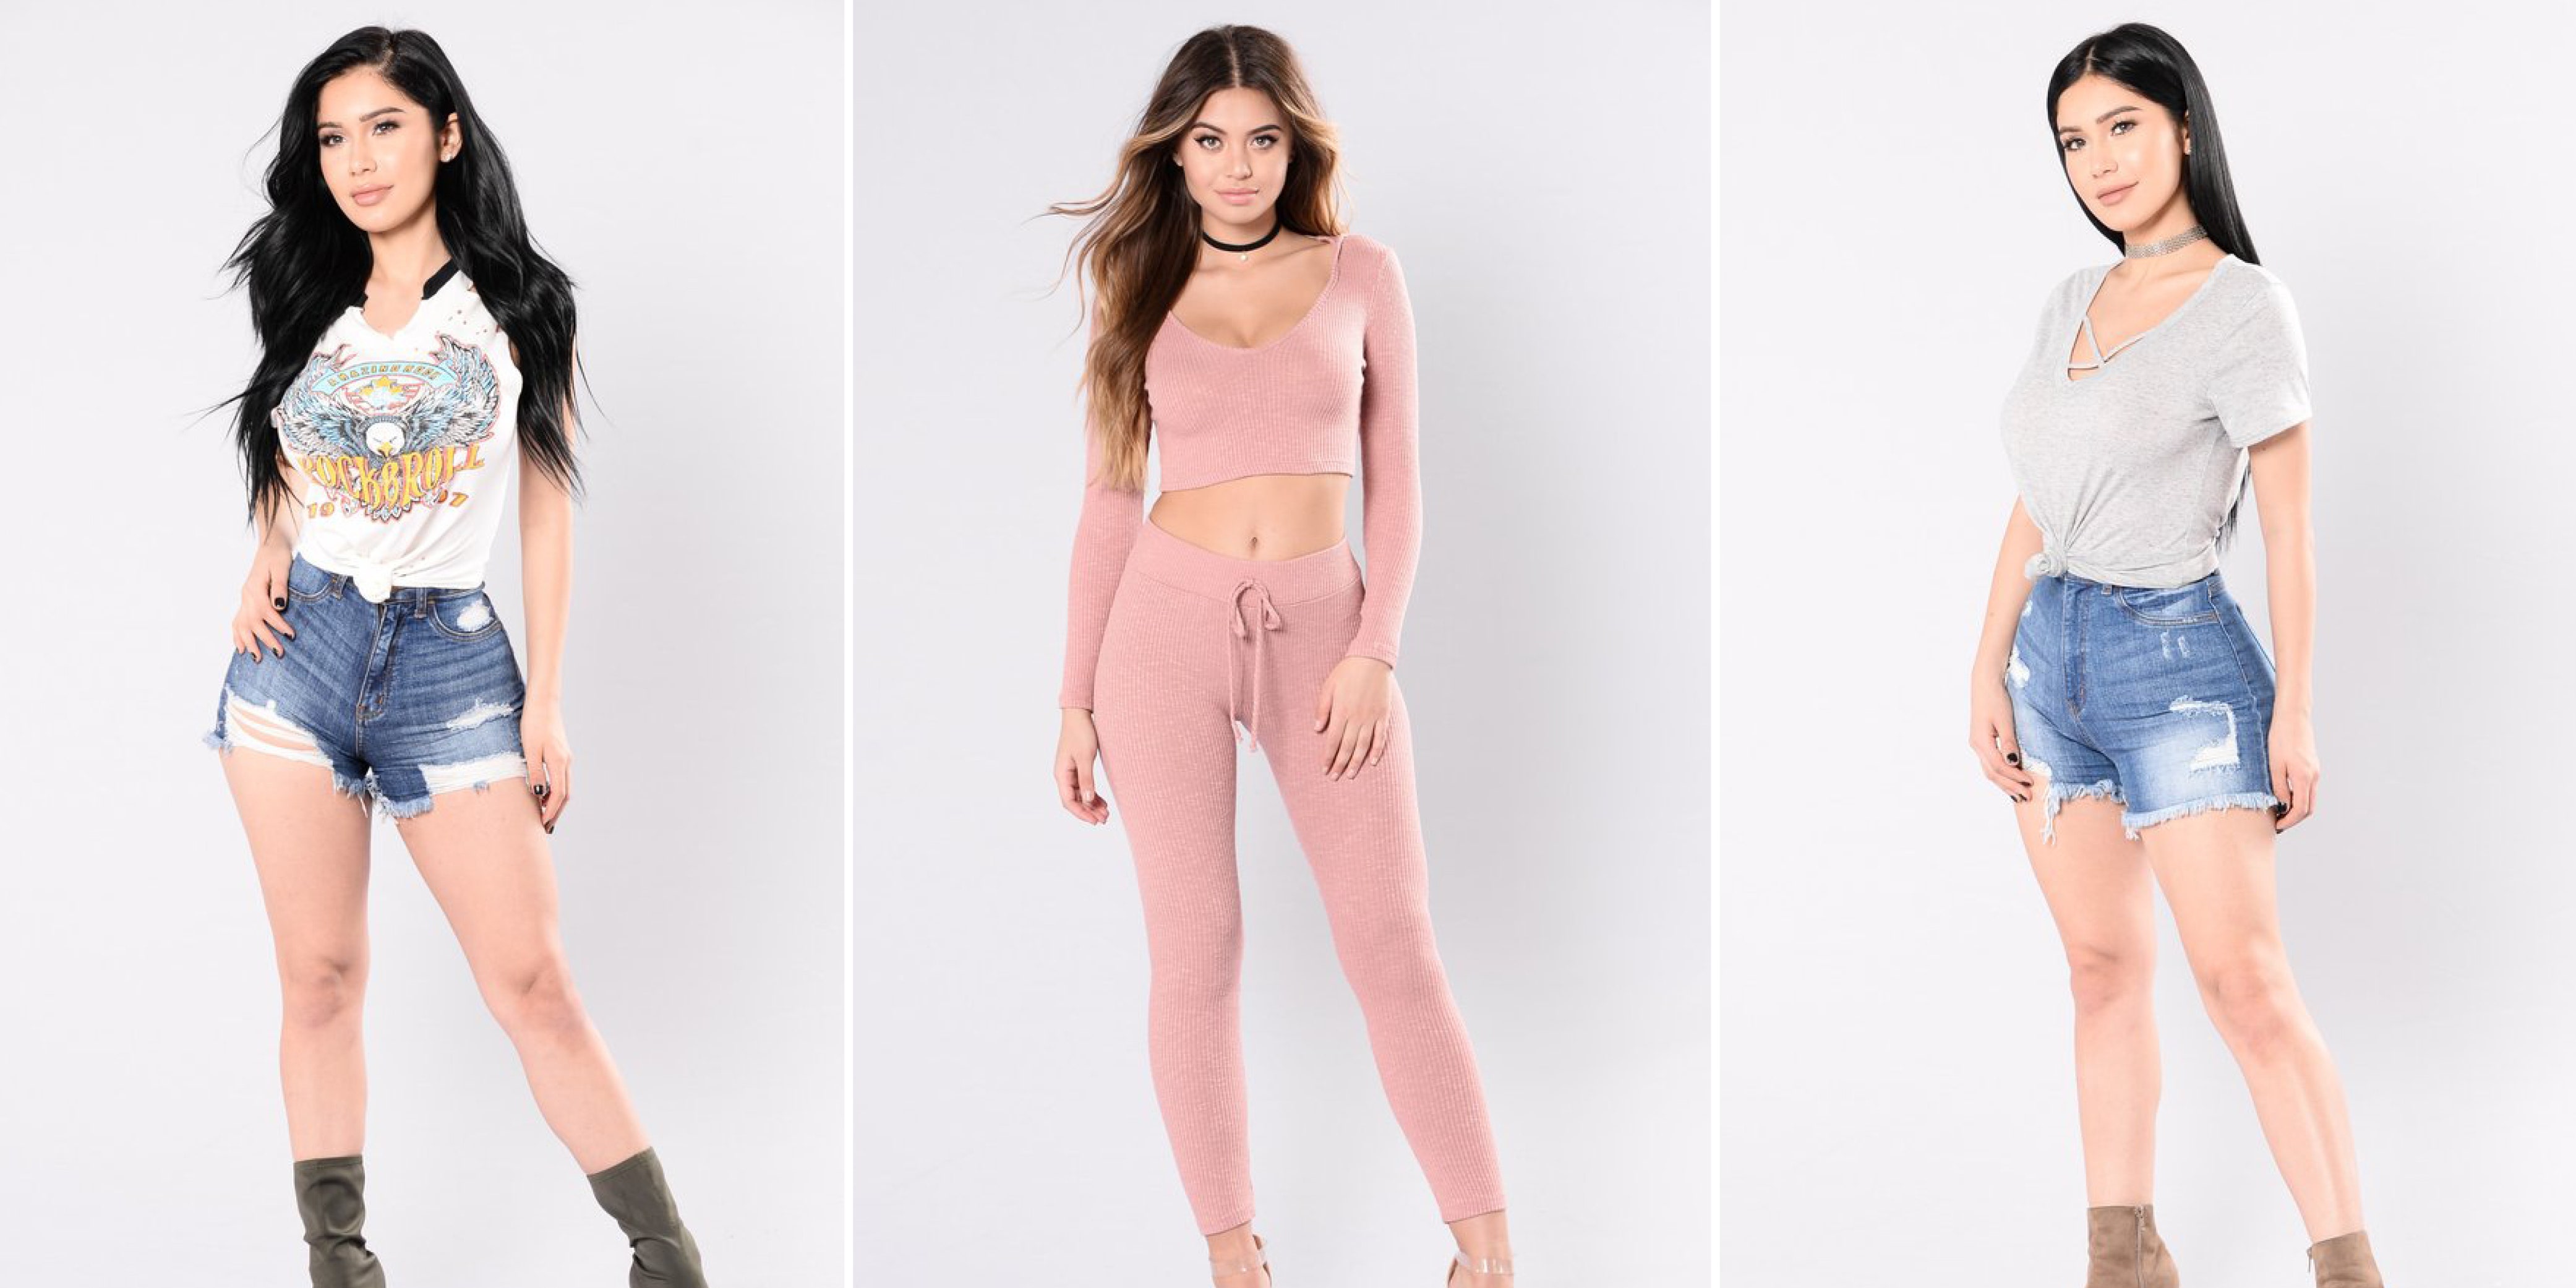 Updated) Fashion Nova Is In Hot Water For Using Straight Size Models To Sell Its Plus Size Line